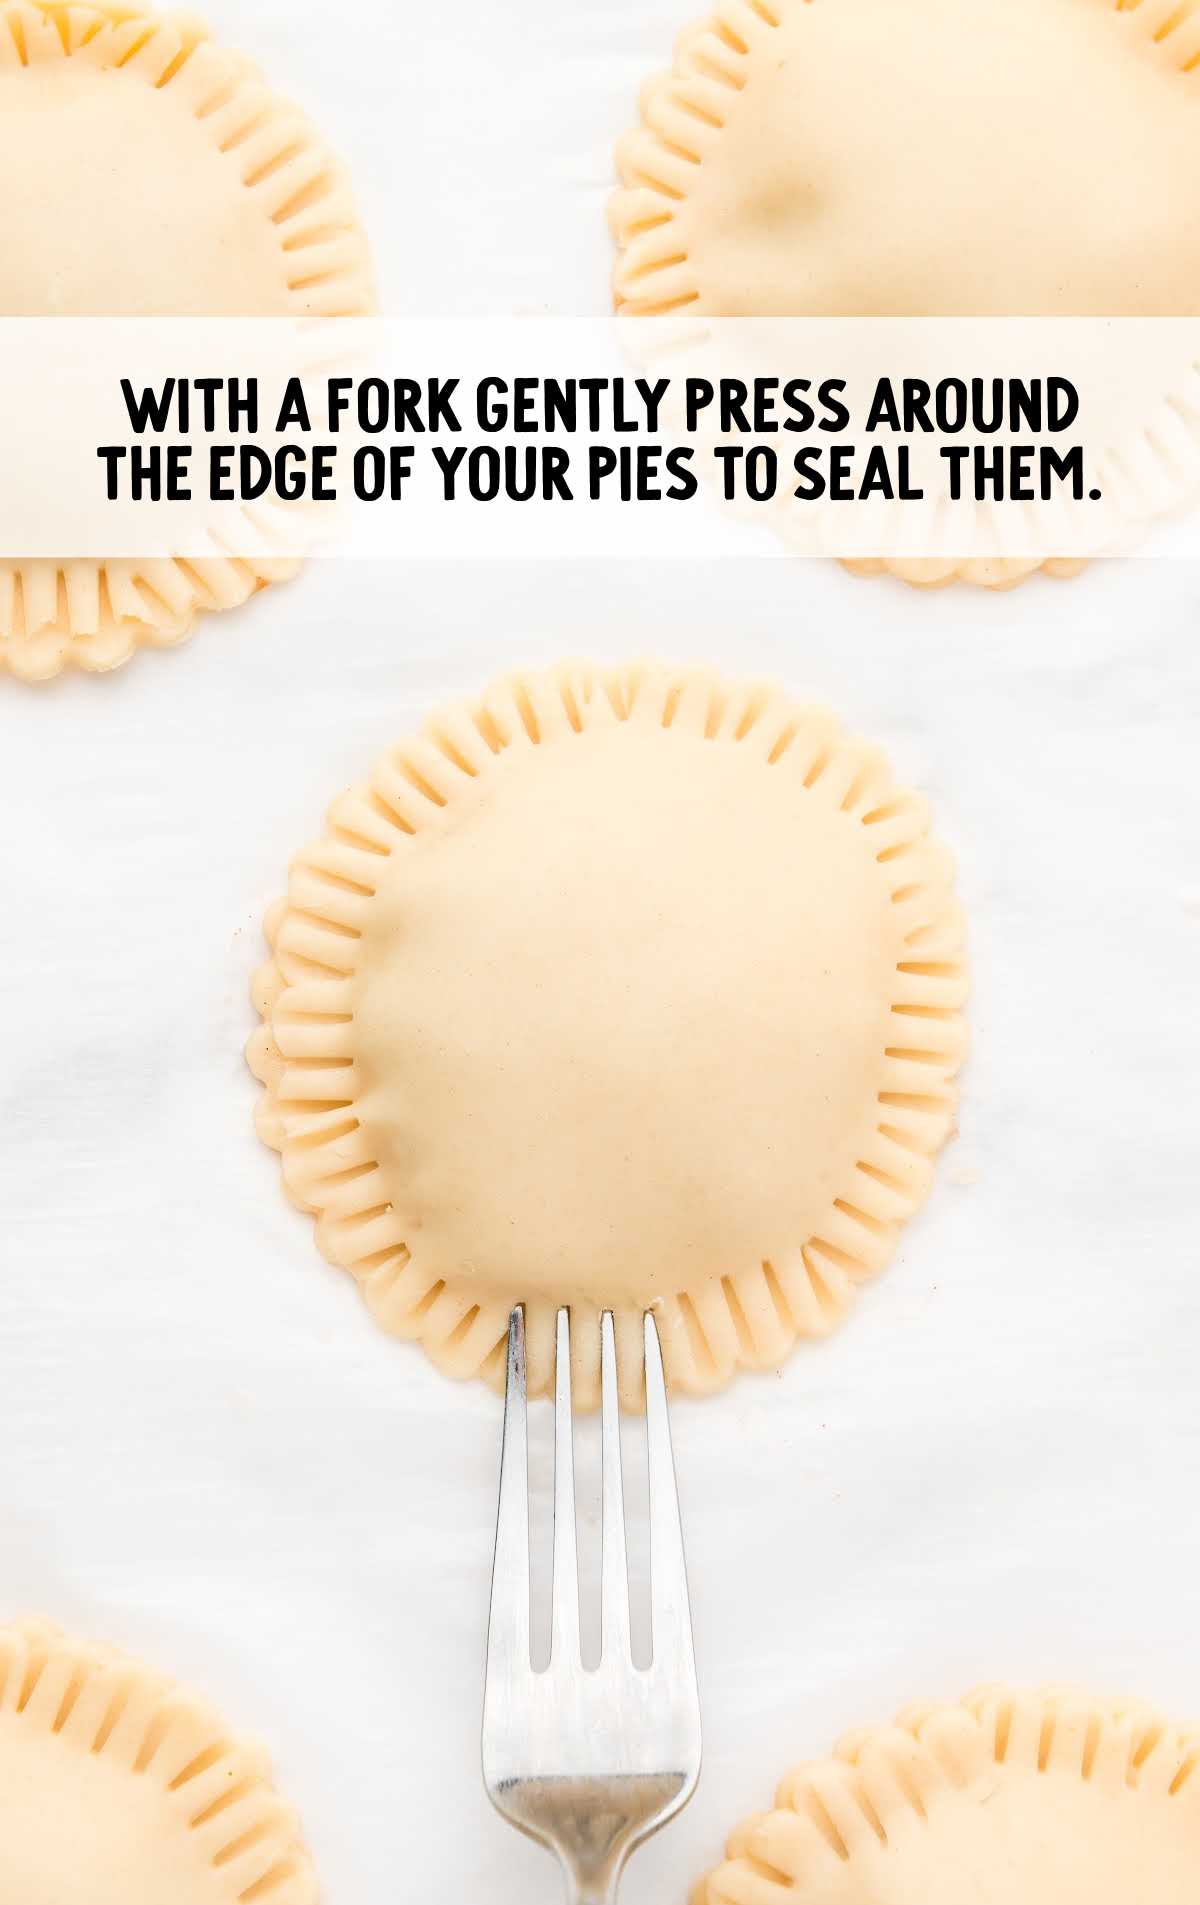 apple pie dough sealed with a fork